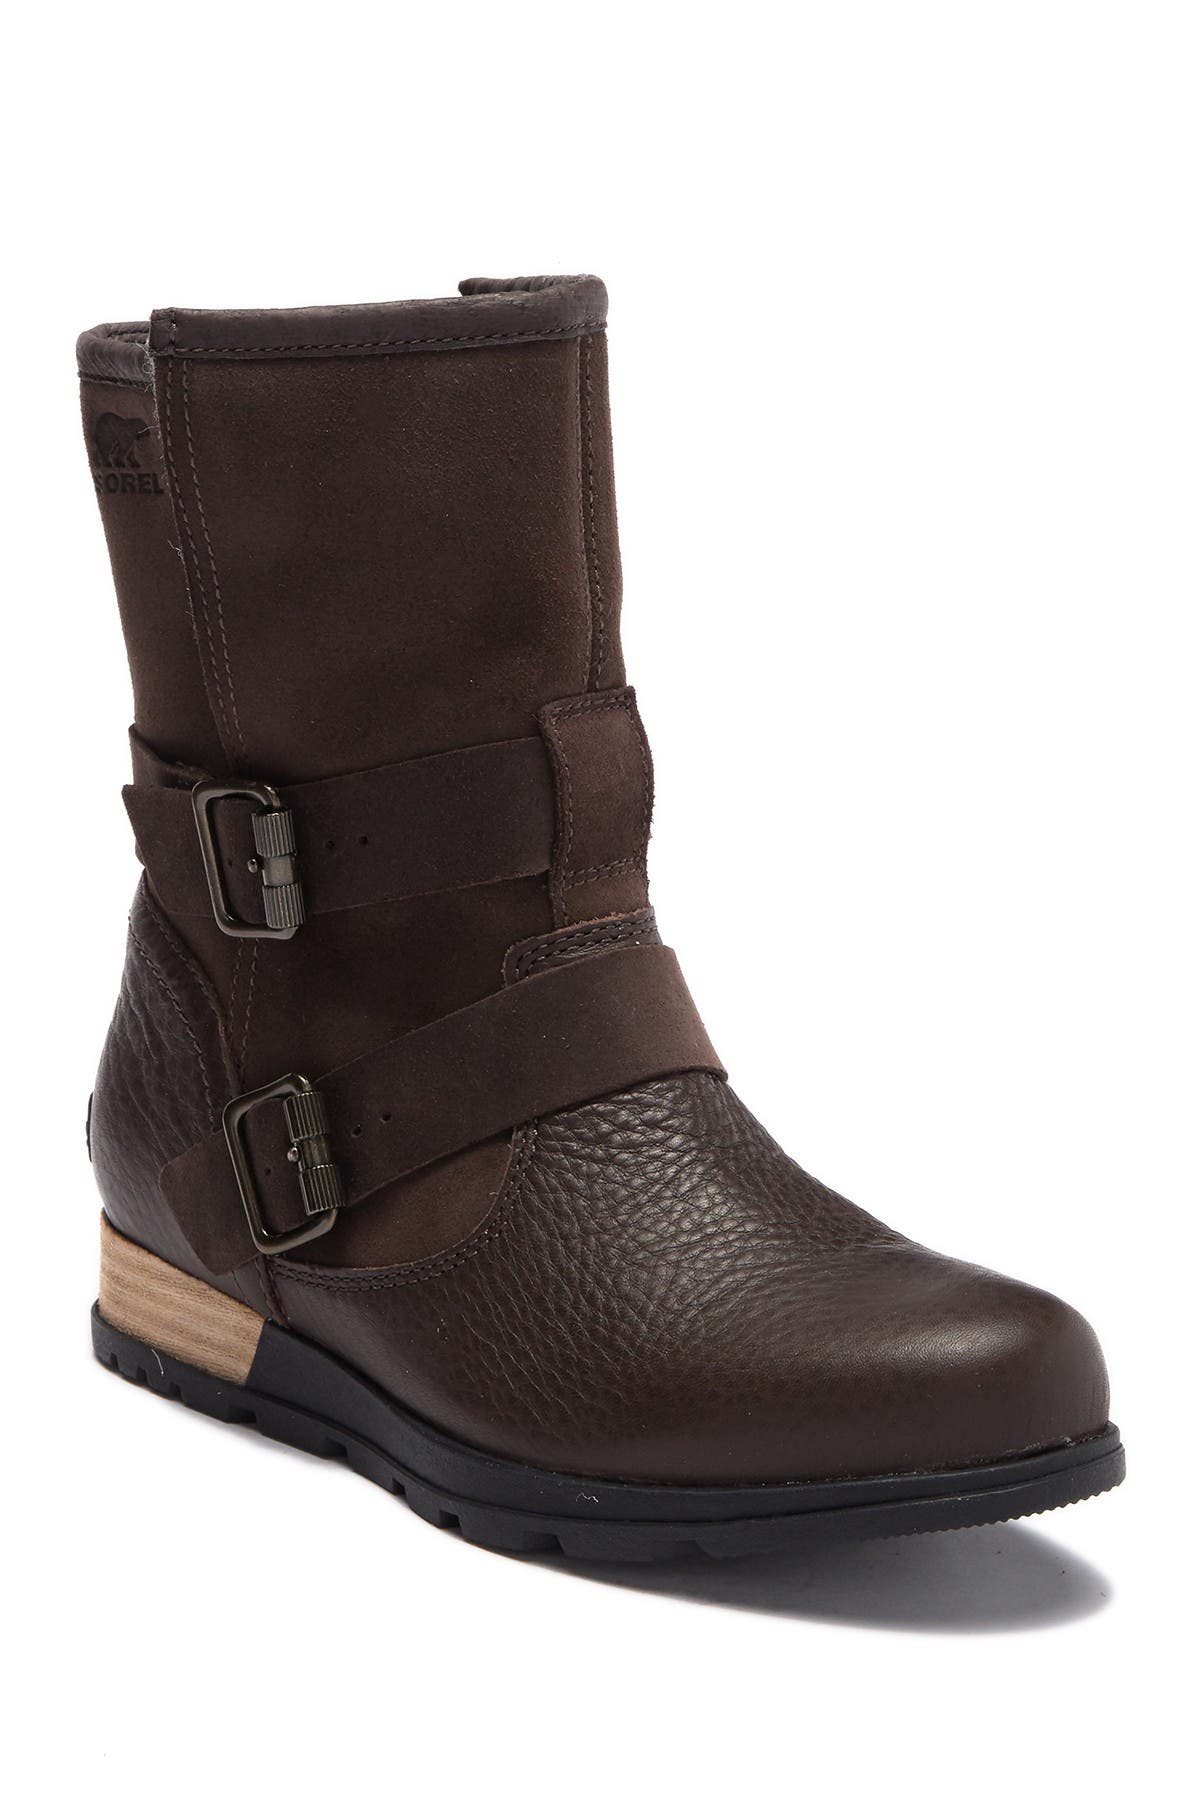 sorel grizzly bear boots